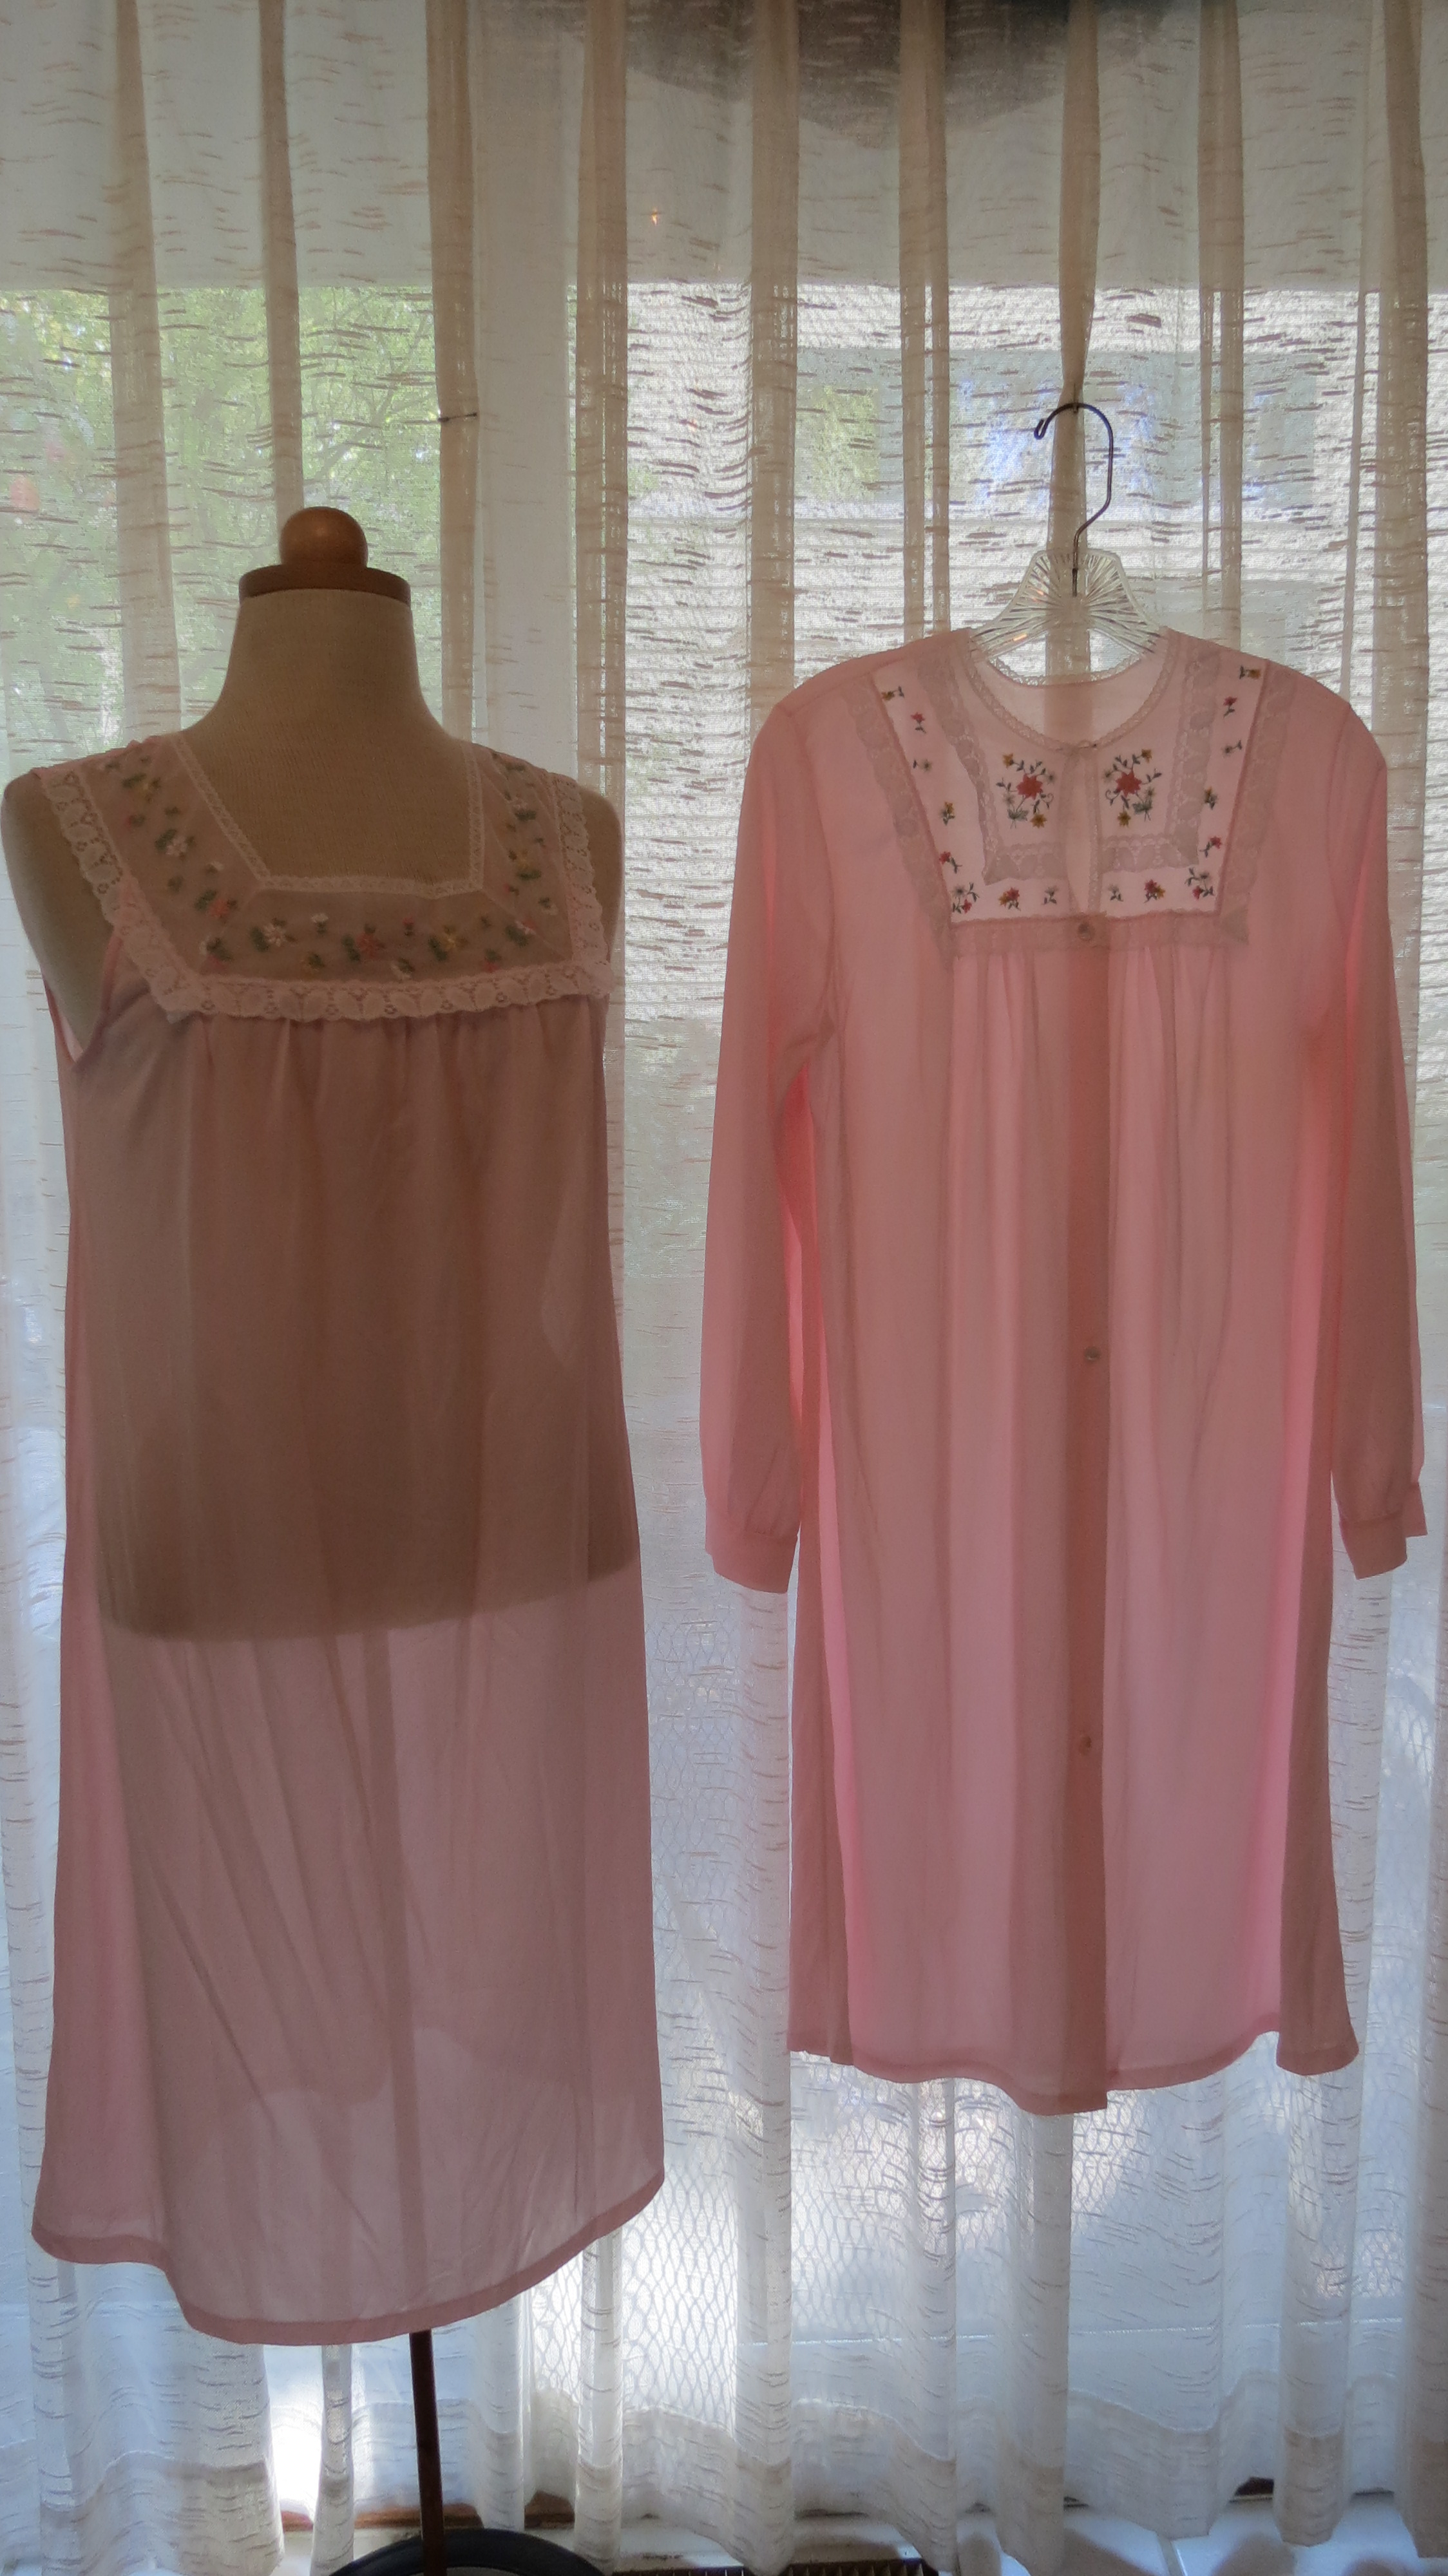 A VERY SWEET TRUE VINTAGE NIGHTGOWN &amp; ROBE SET FROM THE 1960'S